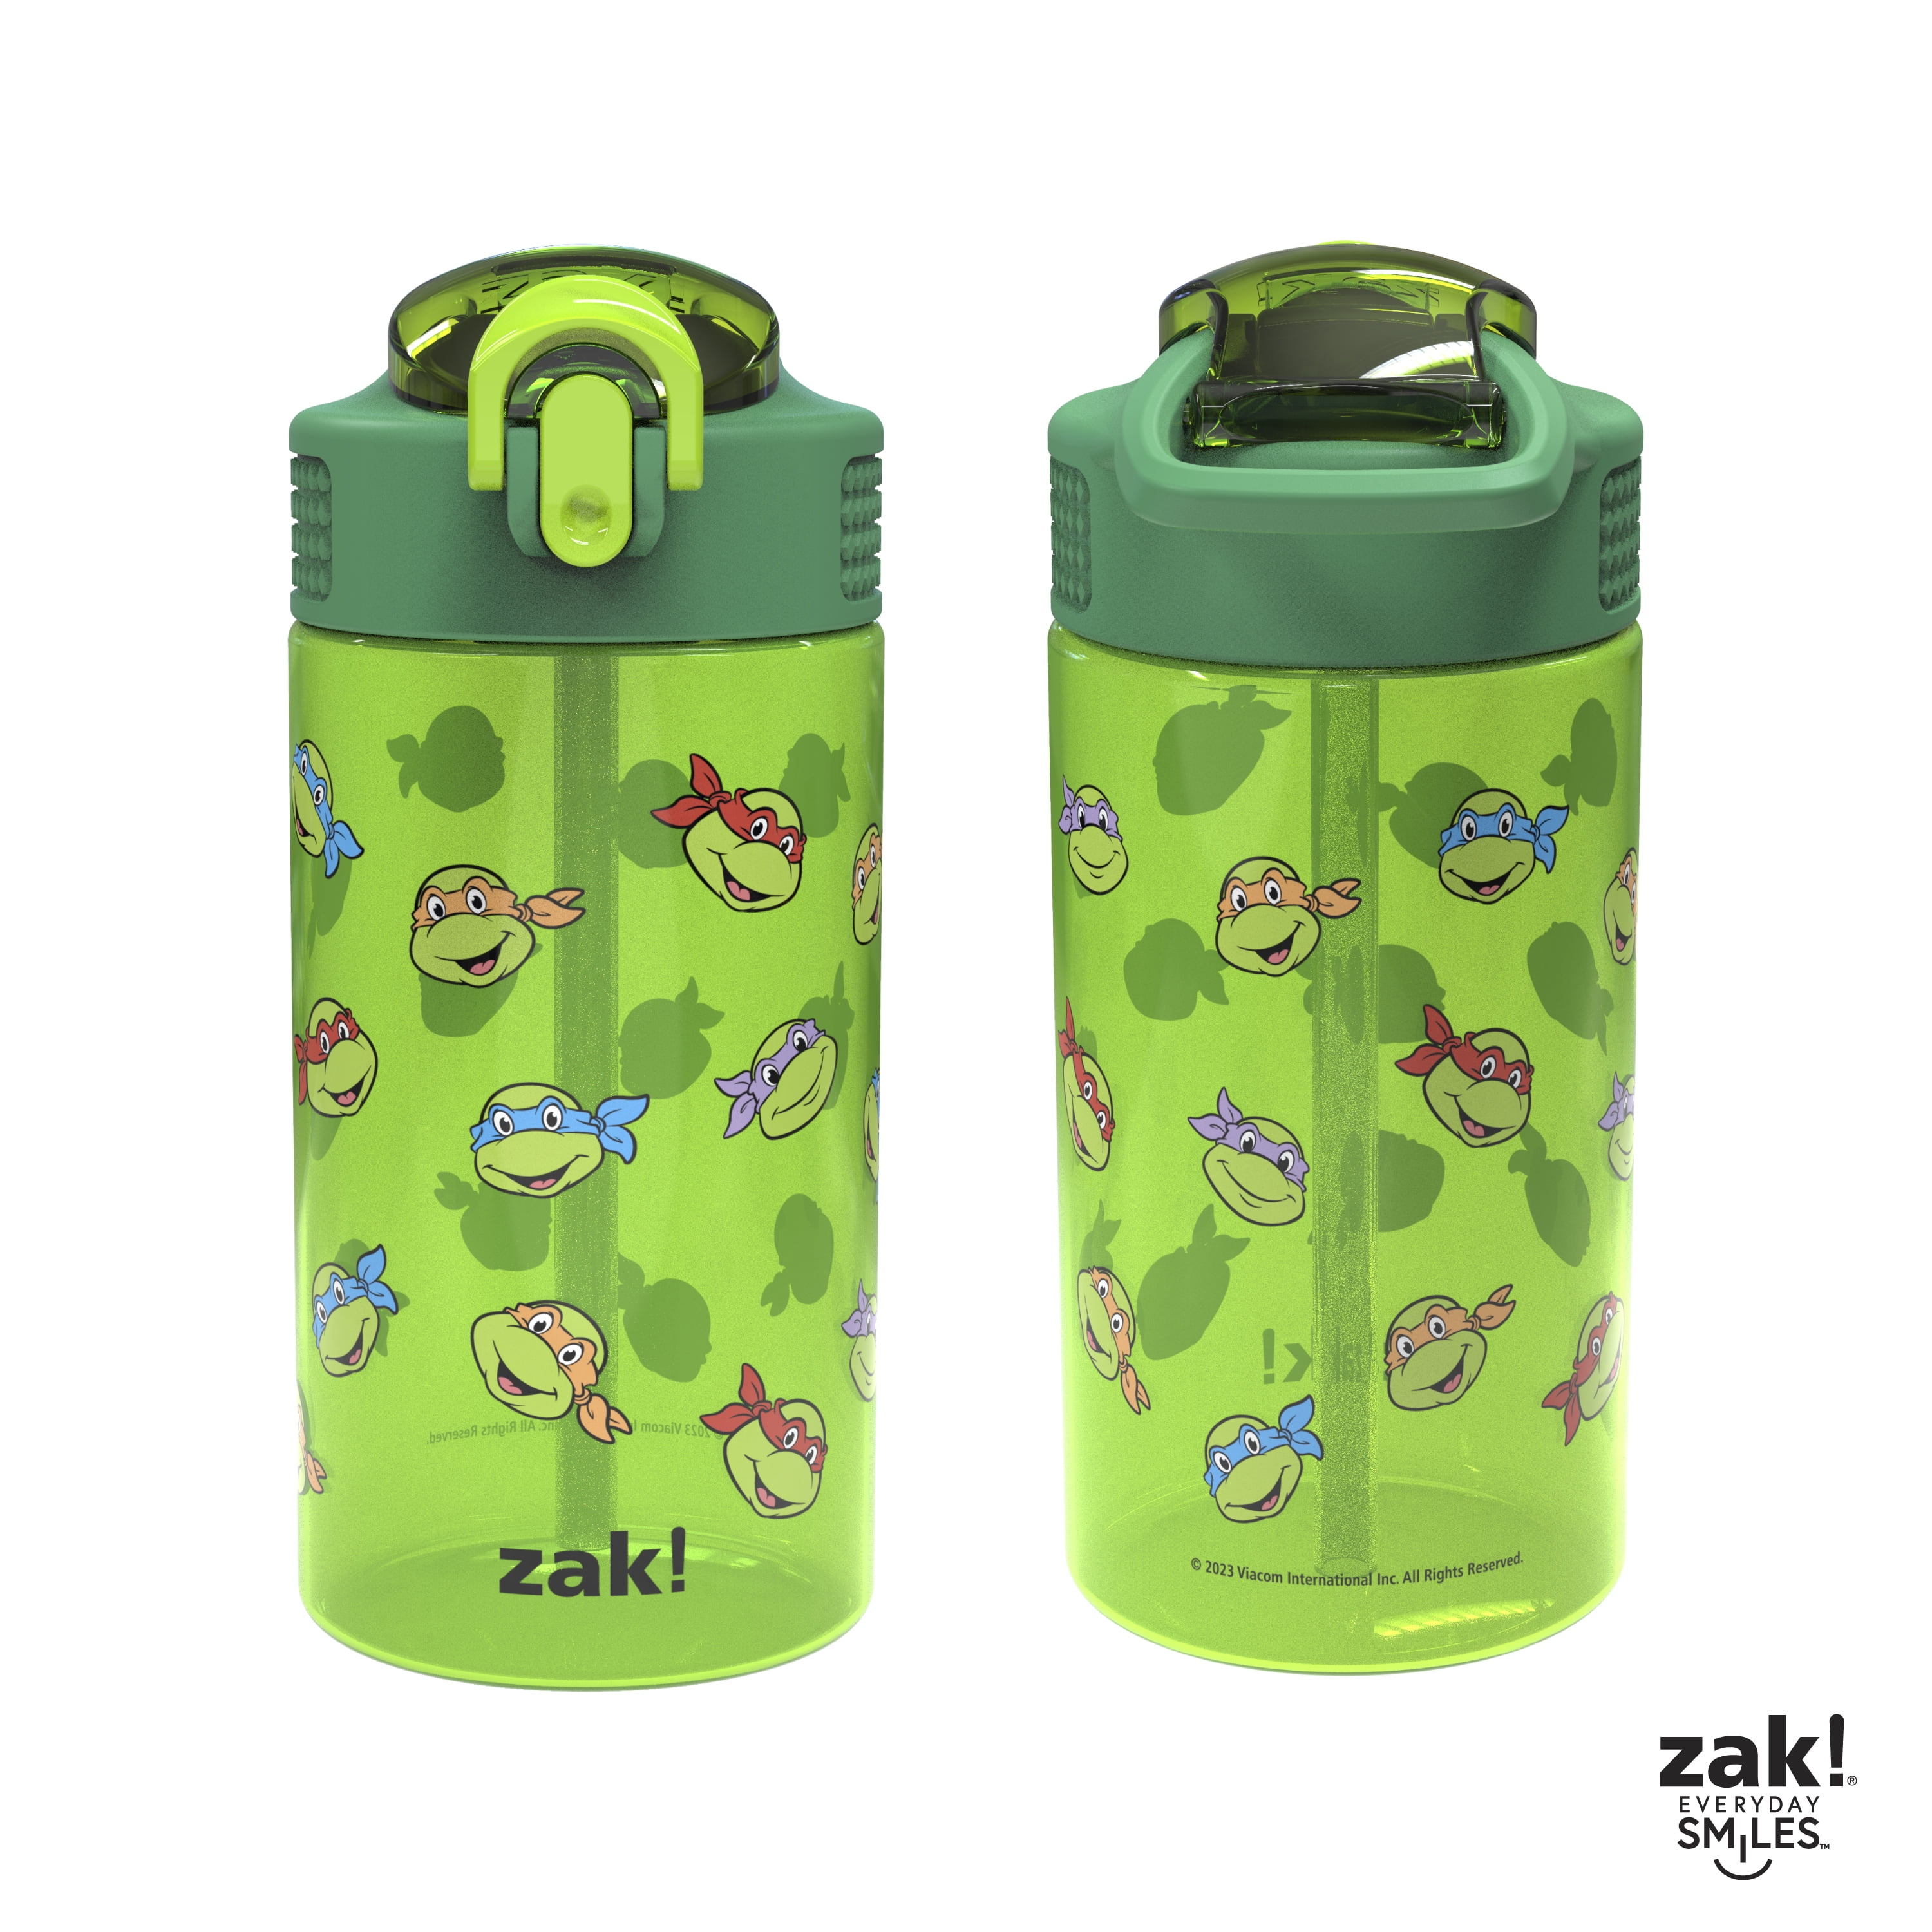 The Perfect Choice for Active Kids ✓ - Zak Designs